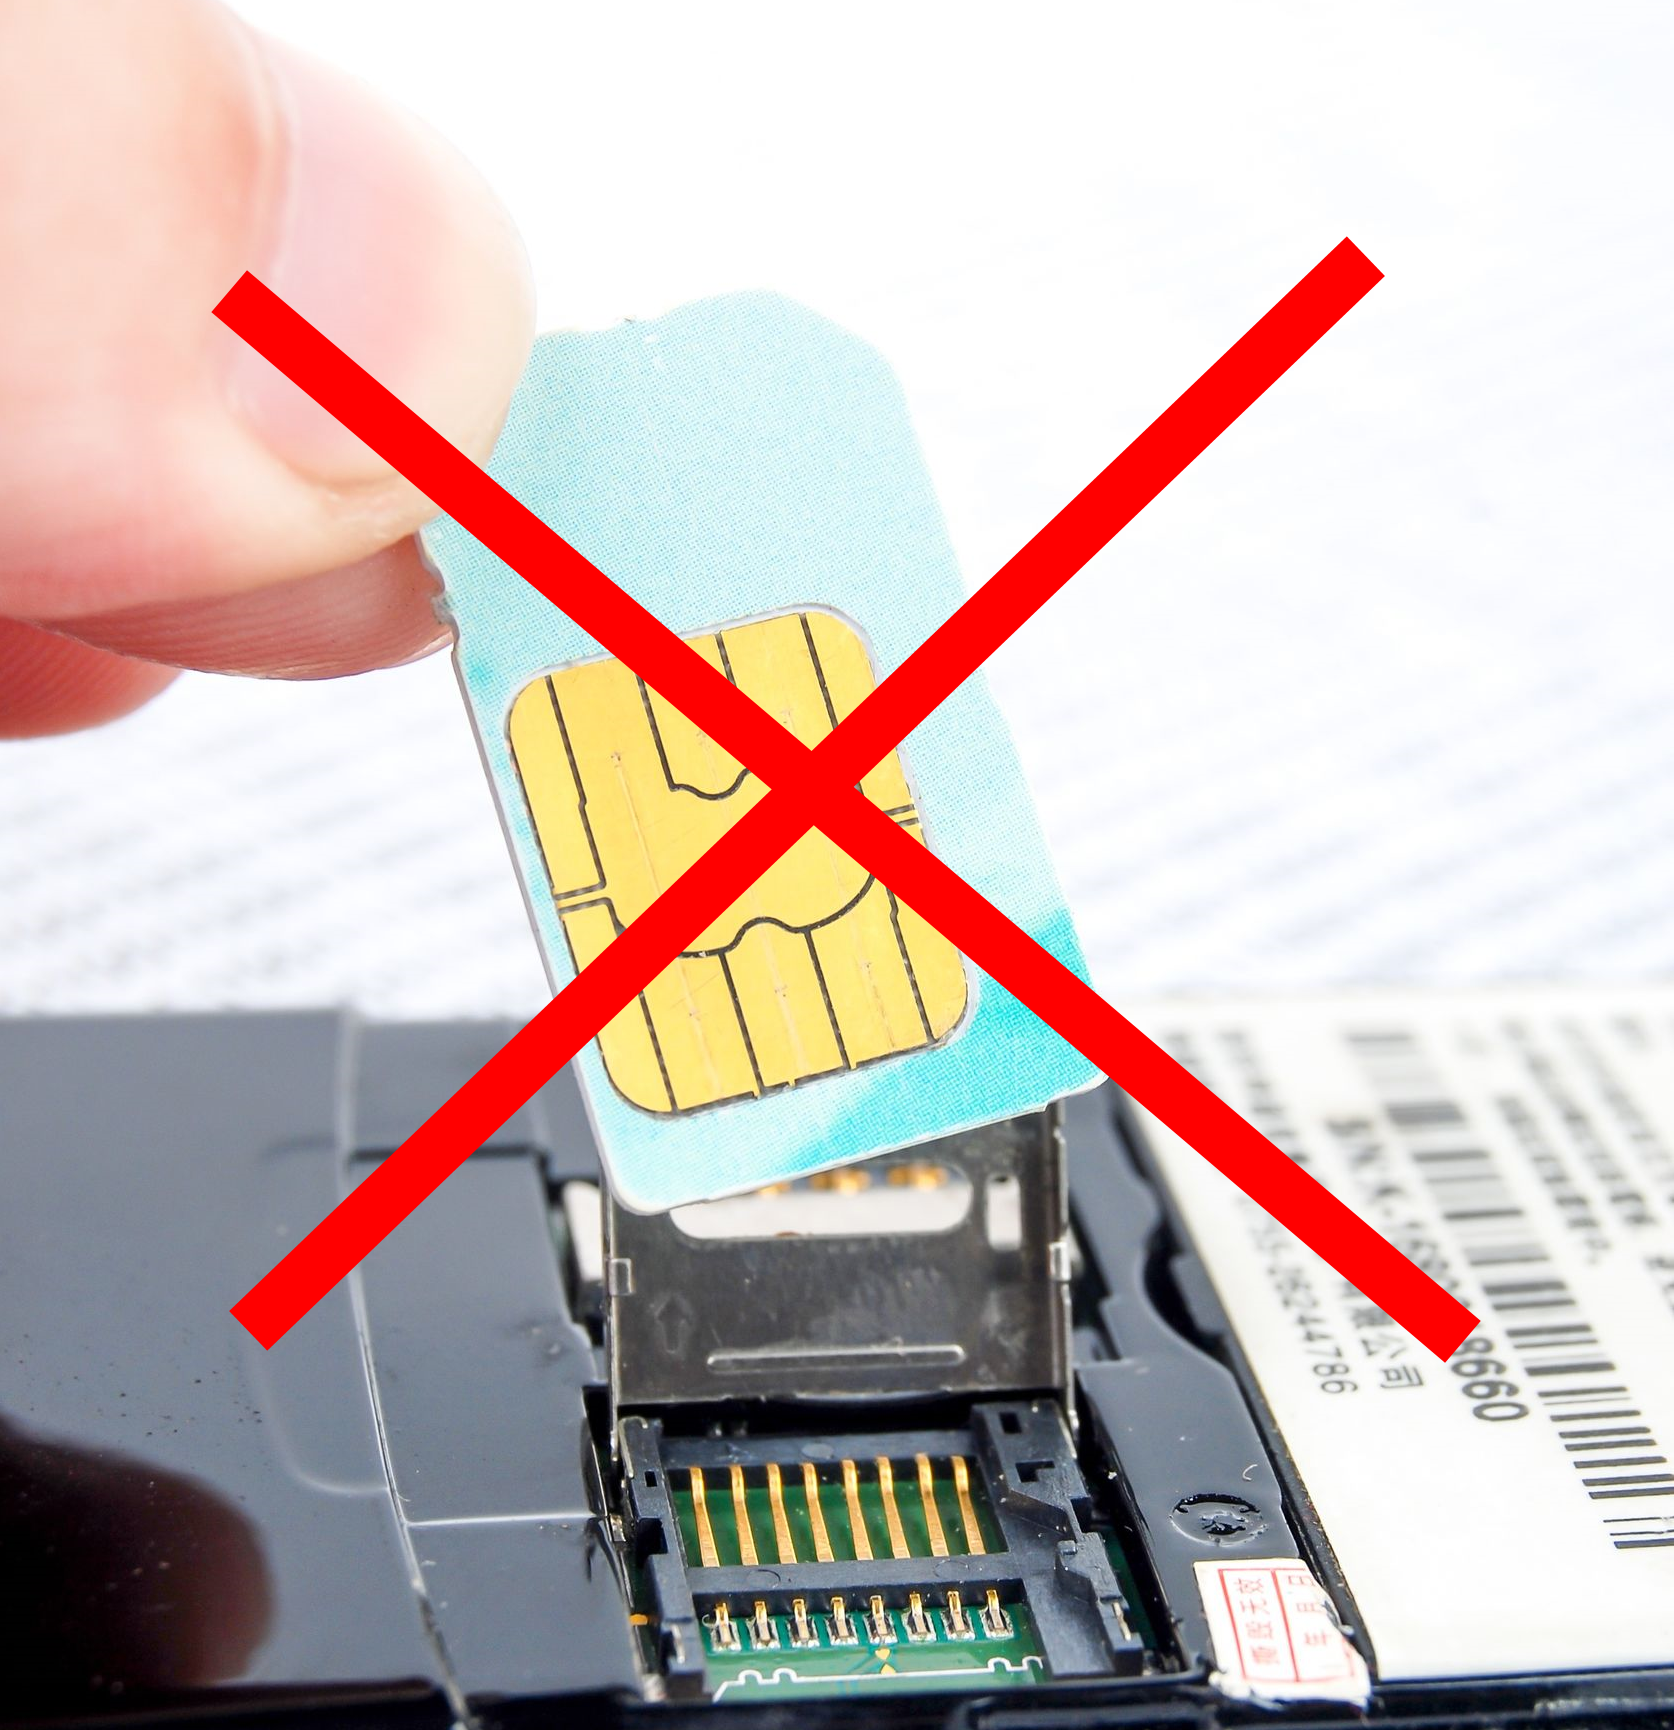 No conventional plastic SIM cards in the TRAPMASTER trap alert